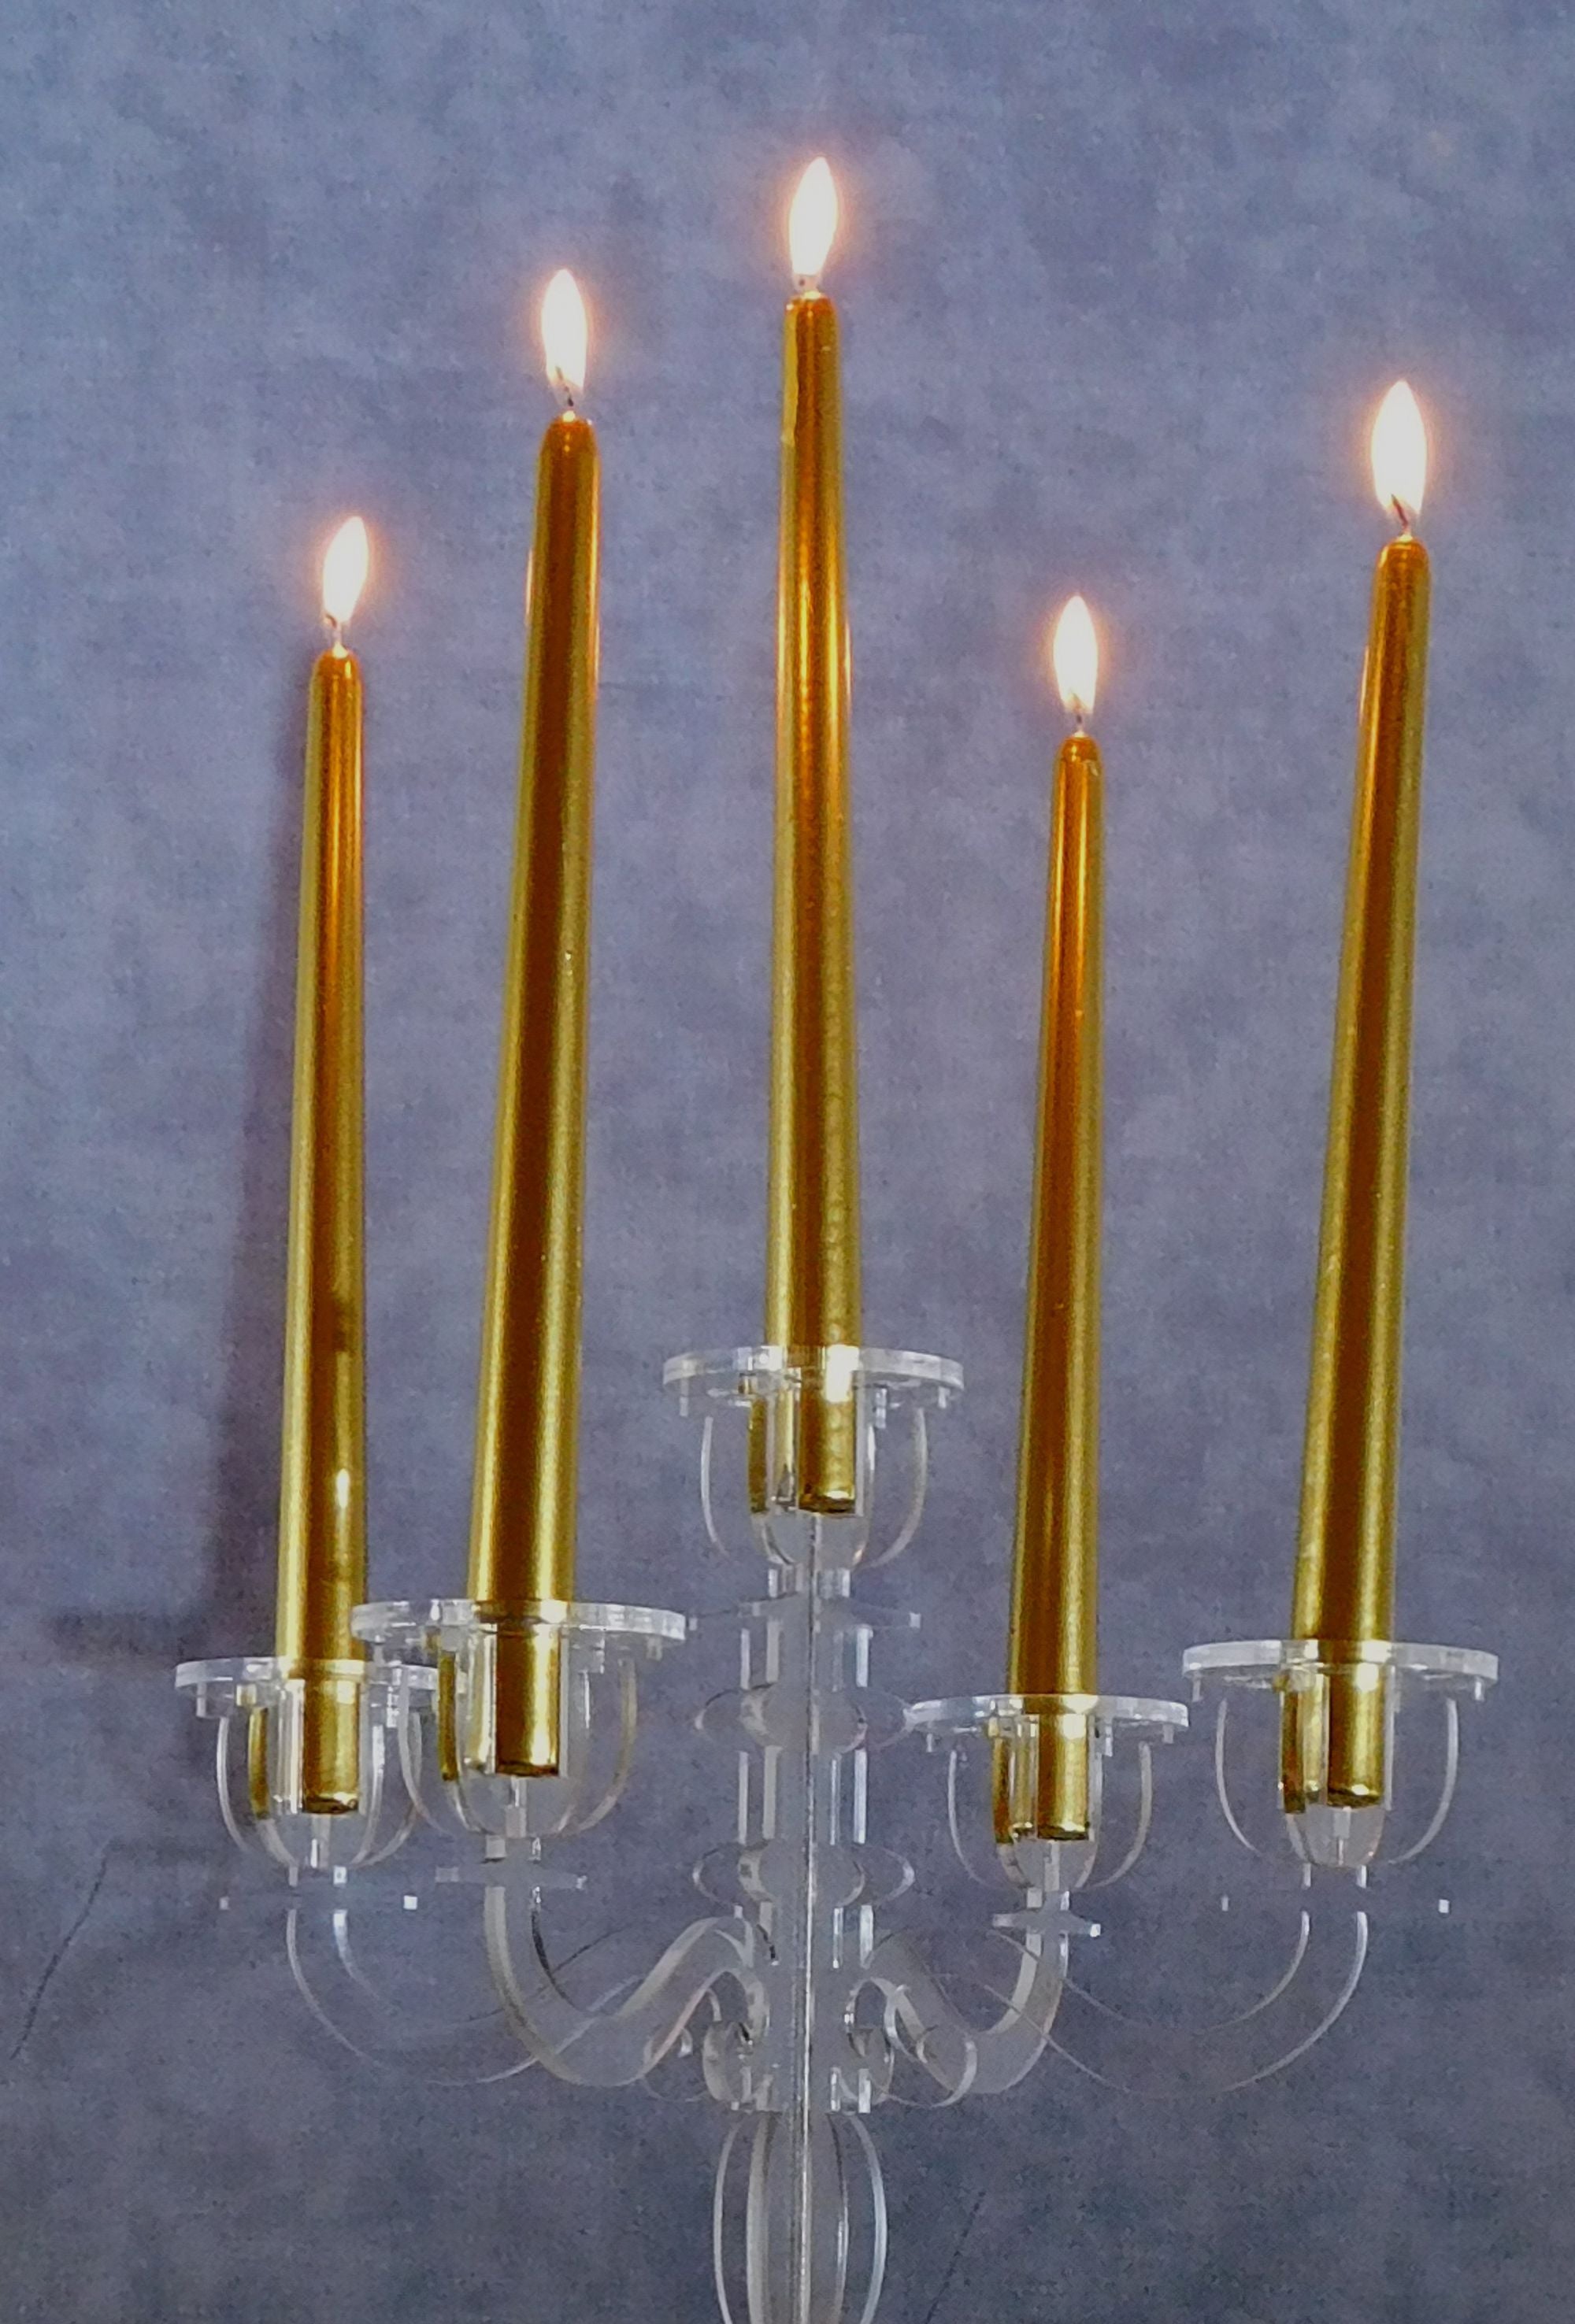 Wax Candle Holder - Great for Special Events